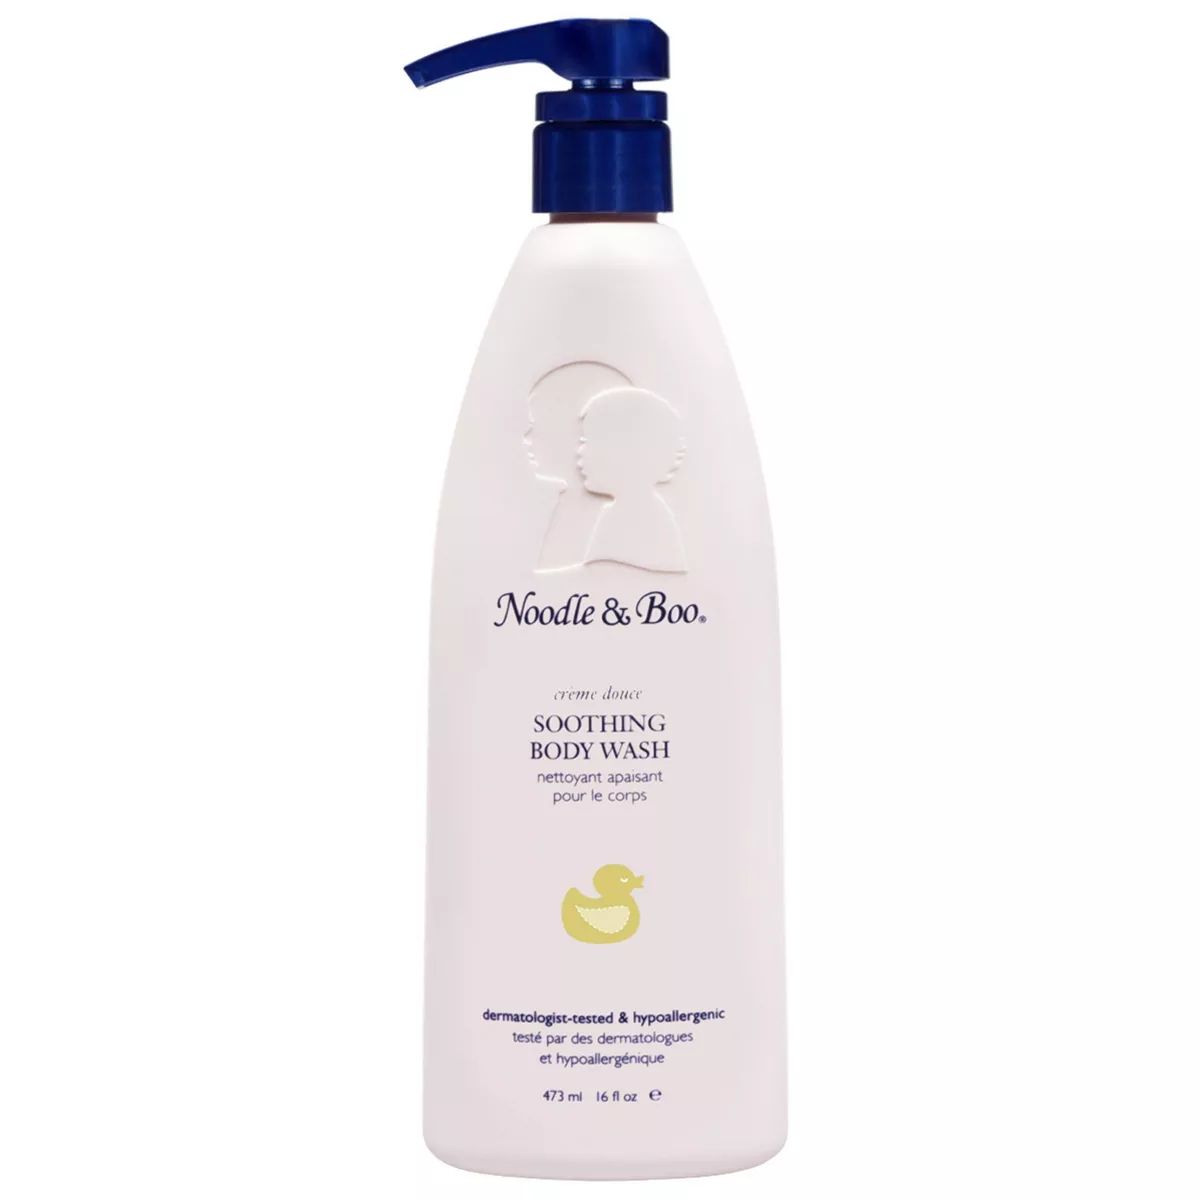 Noodle & Boo Newborn and Baby Soothing Body Wash - Creme Douce - 16 fl oz | Target